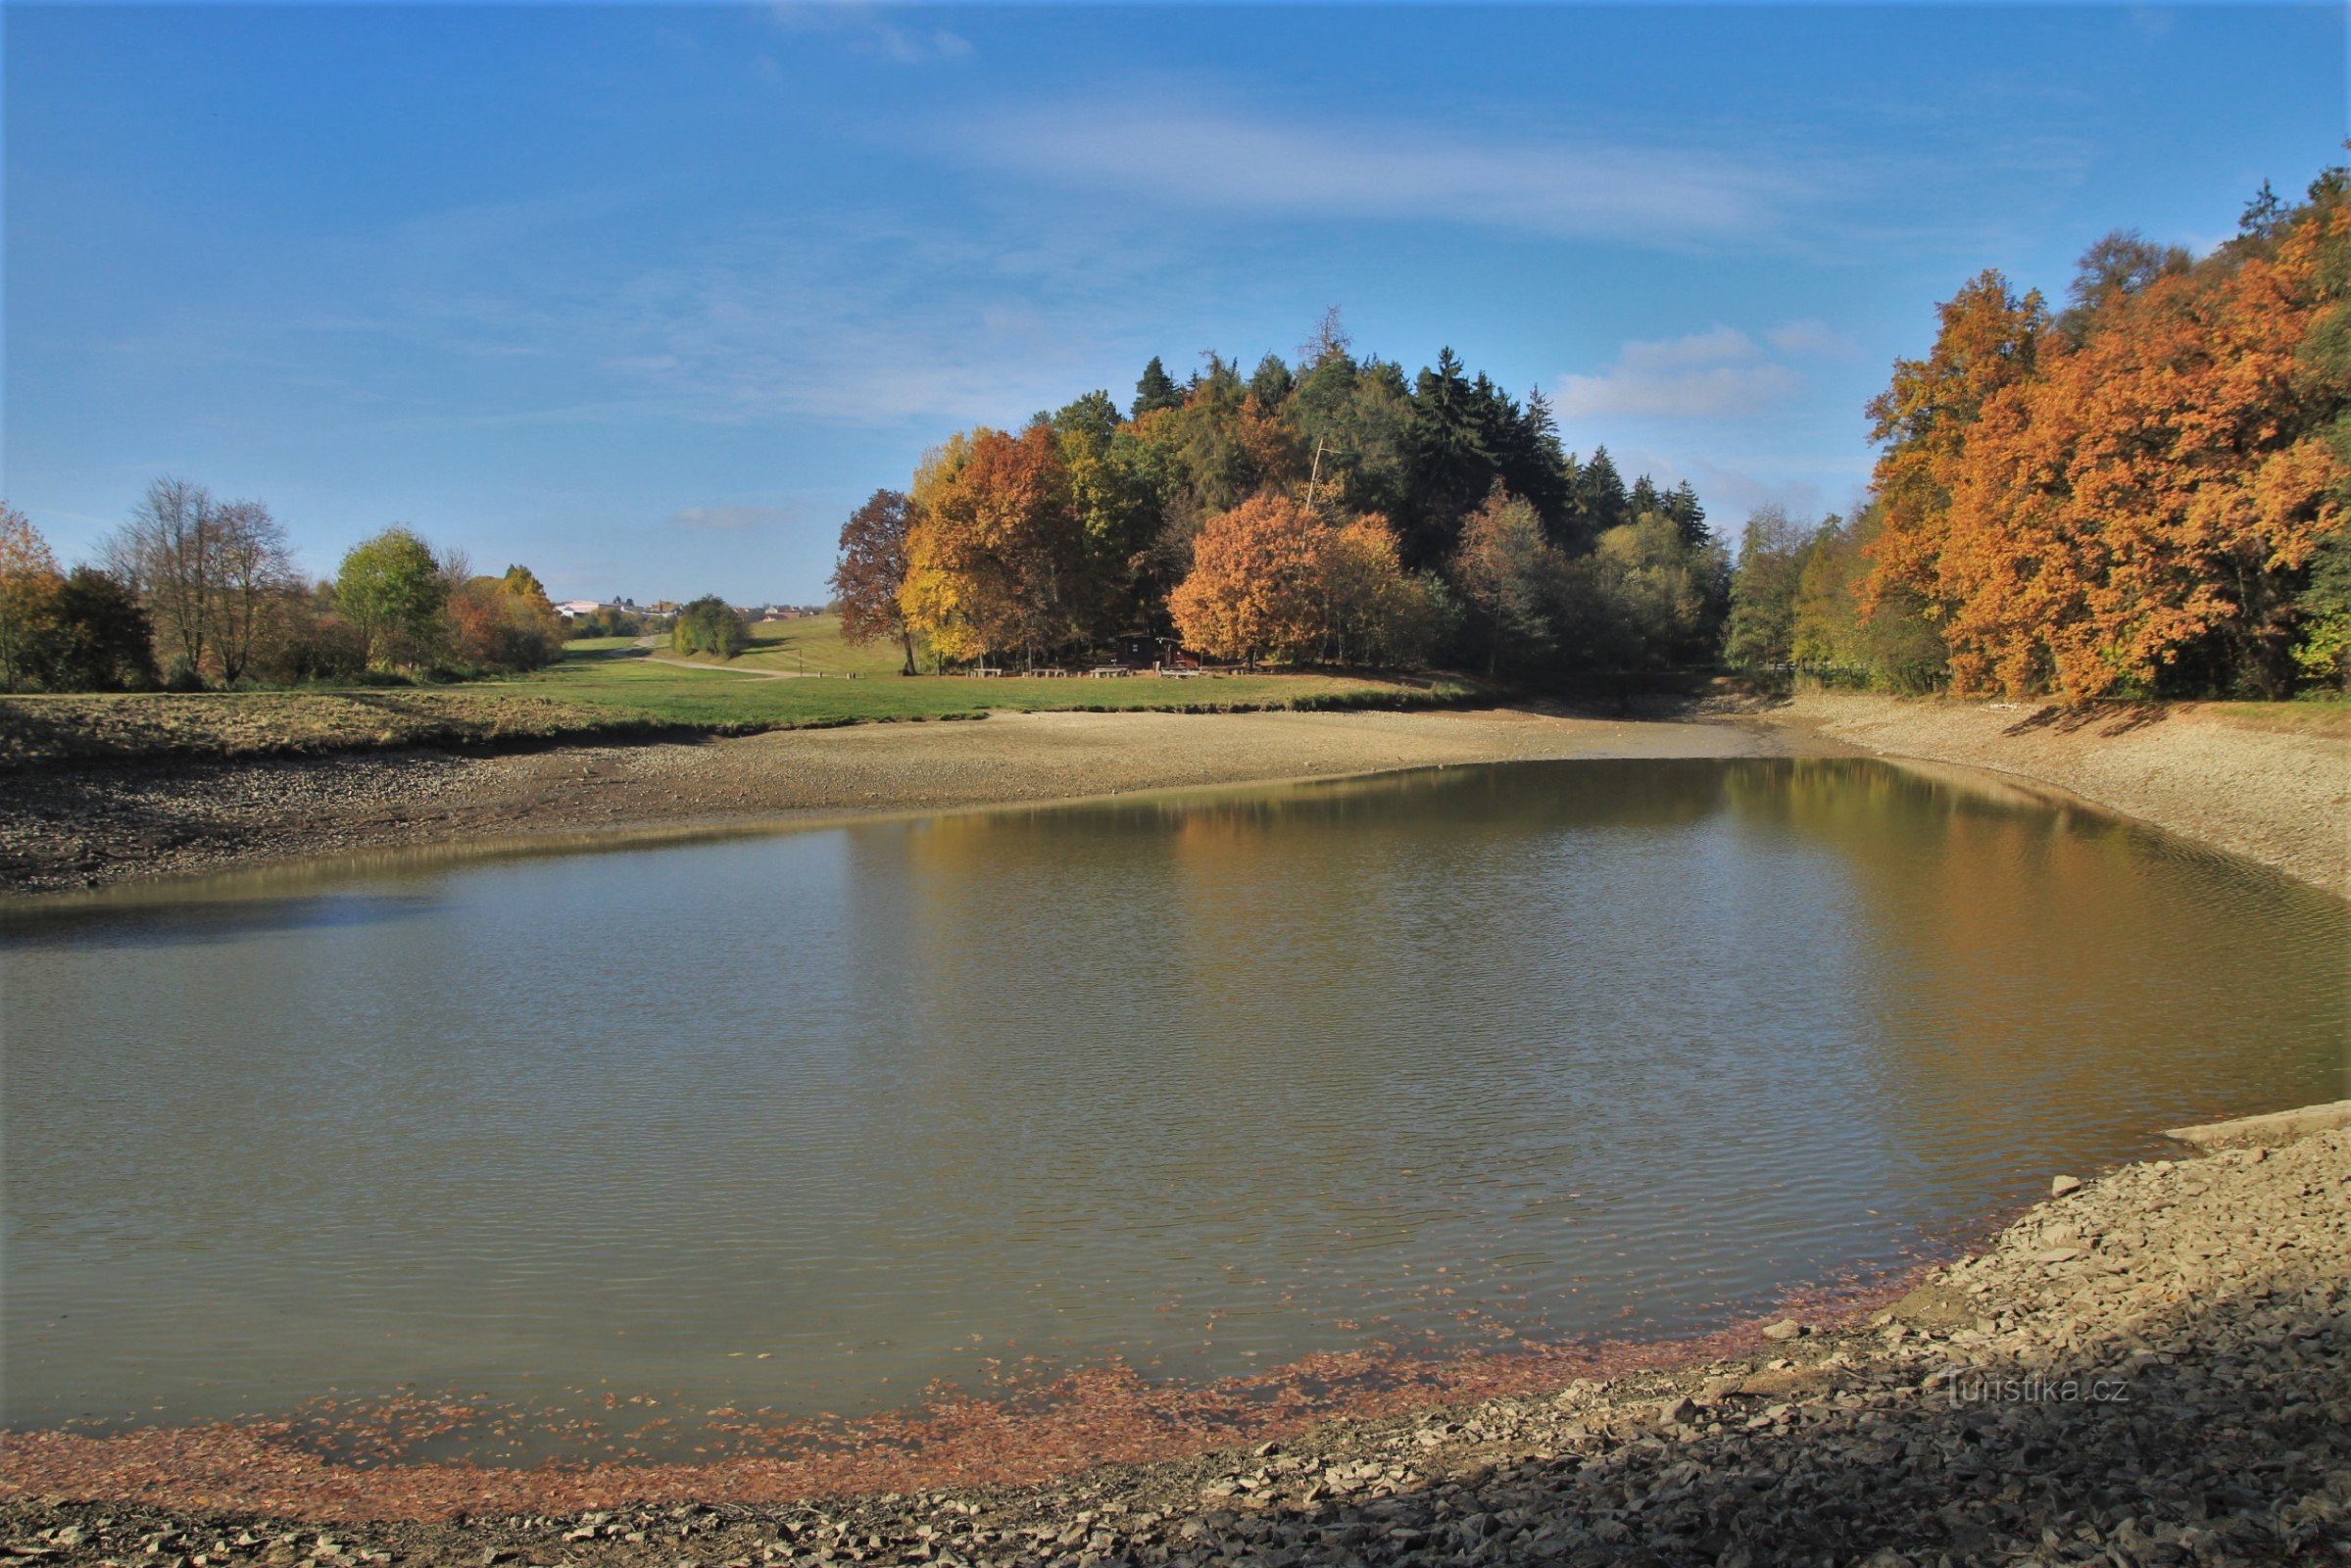 Partially drained pond